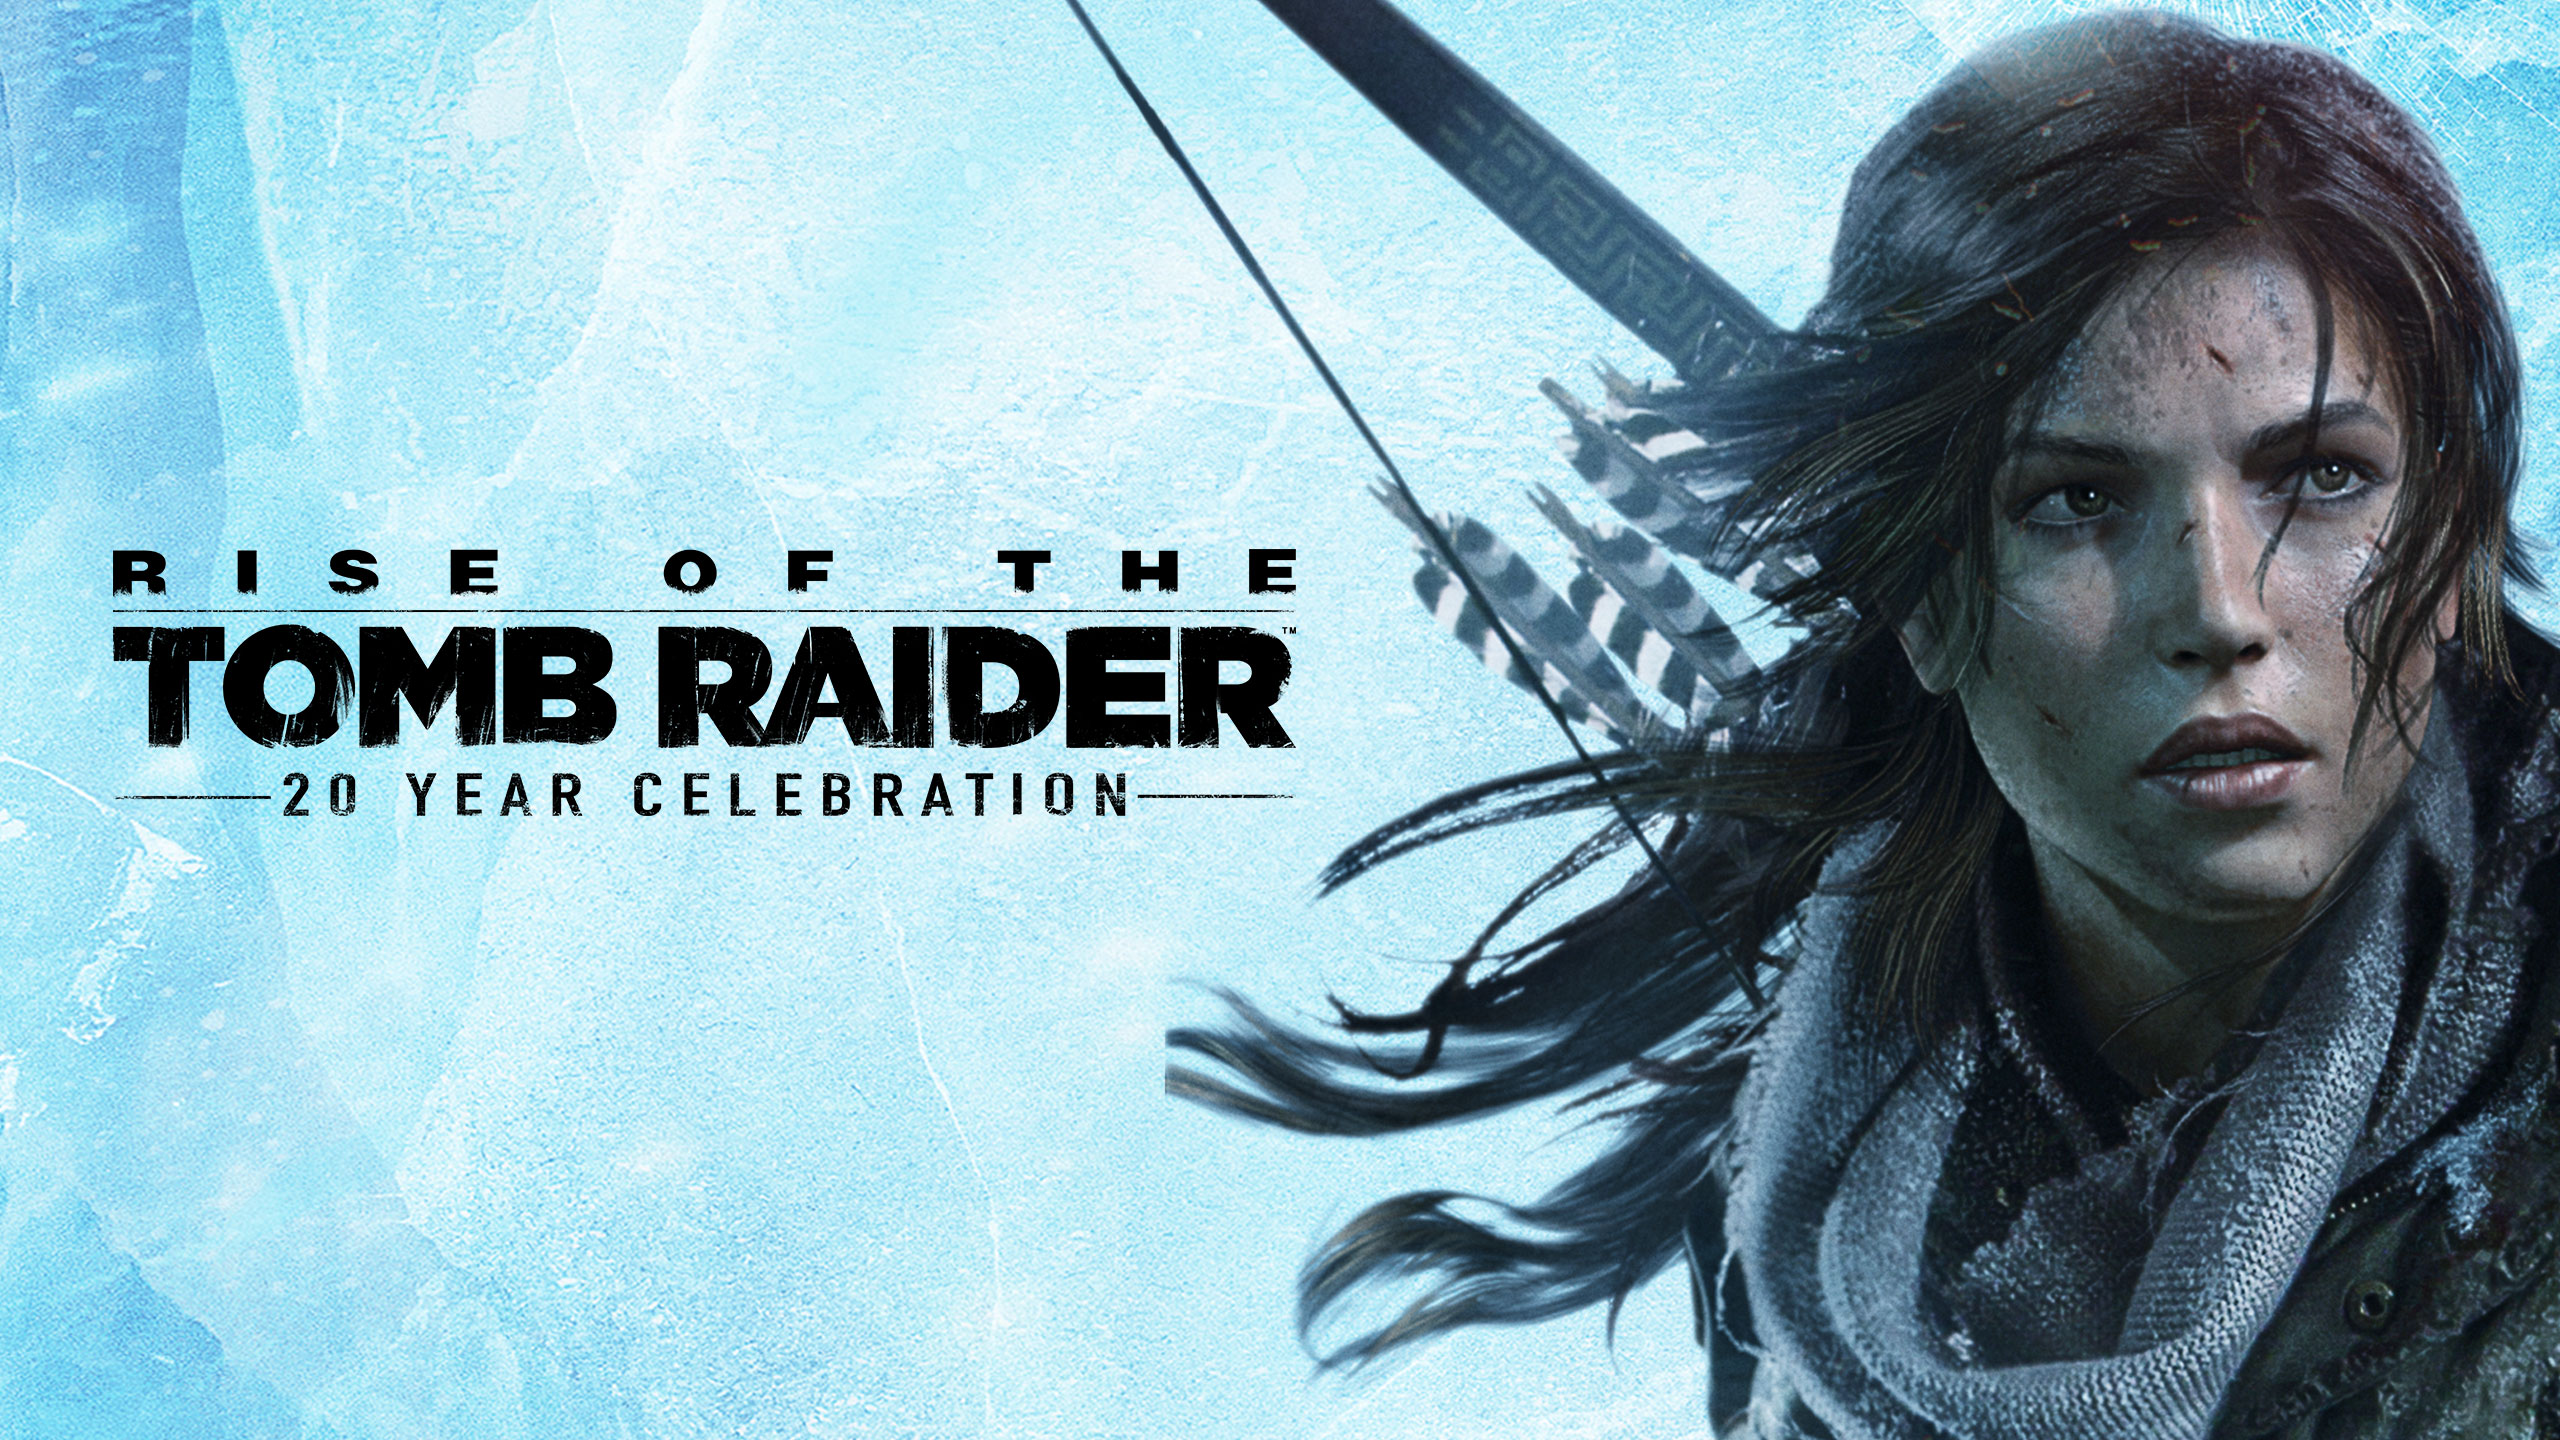 Rise of the Tomb Raider: 20 Year Celebration. Download and Buy Today Games Store